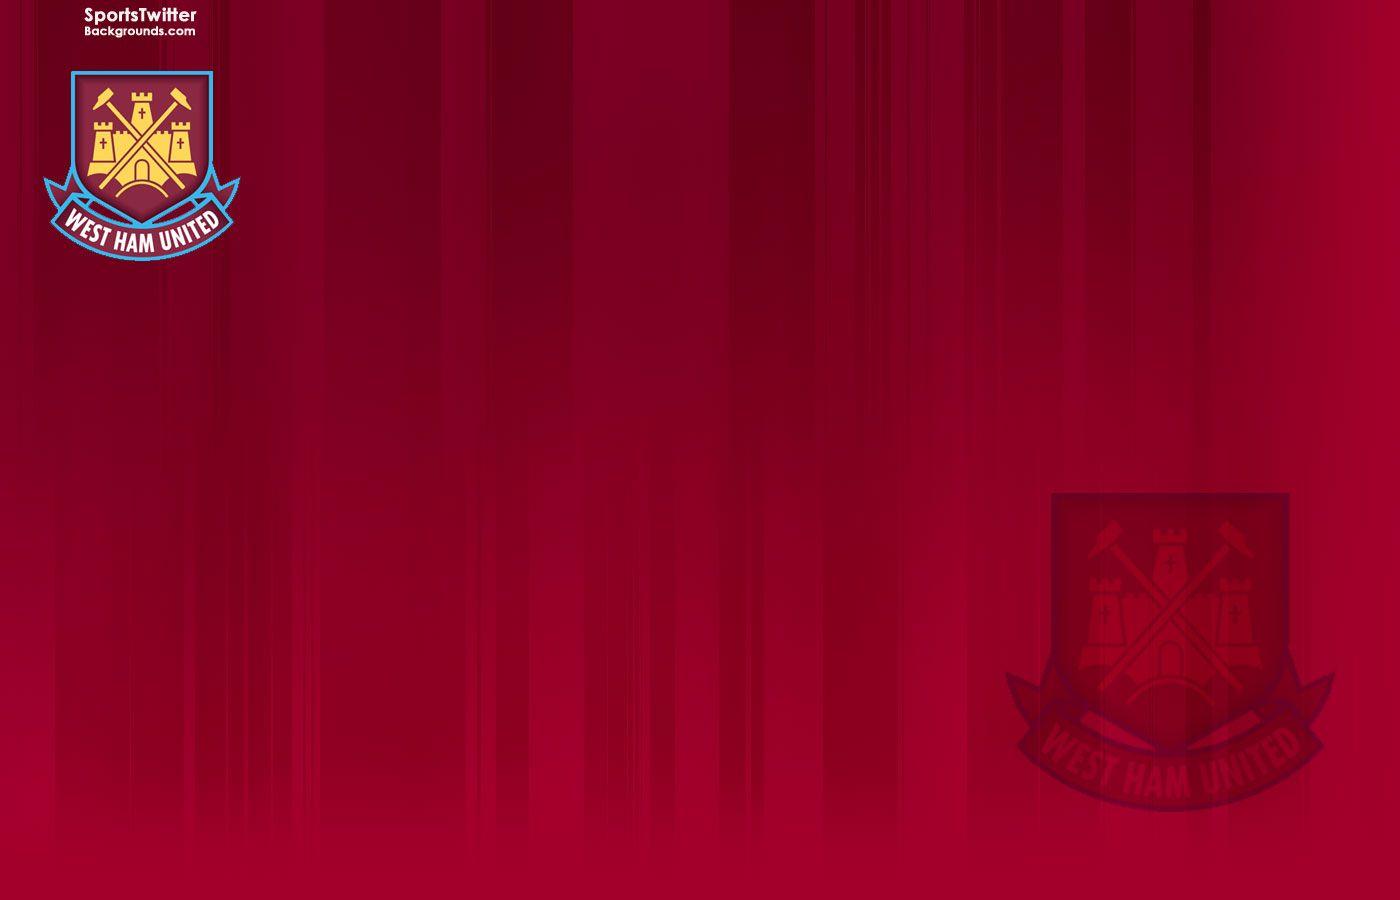 Special West Ham United HQ Wallpaper. World's Greatest Art Site